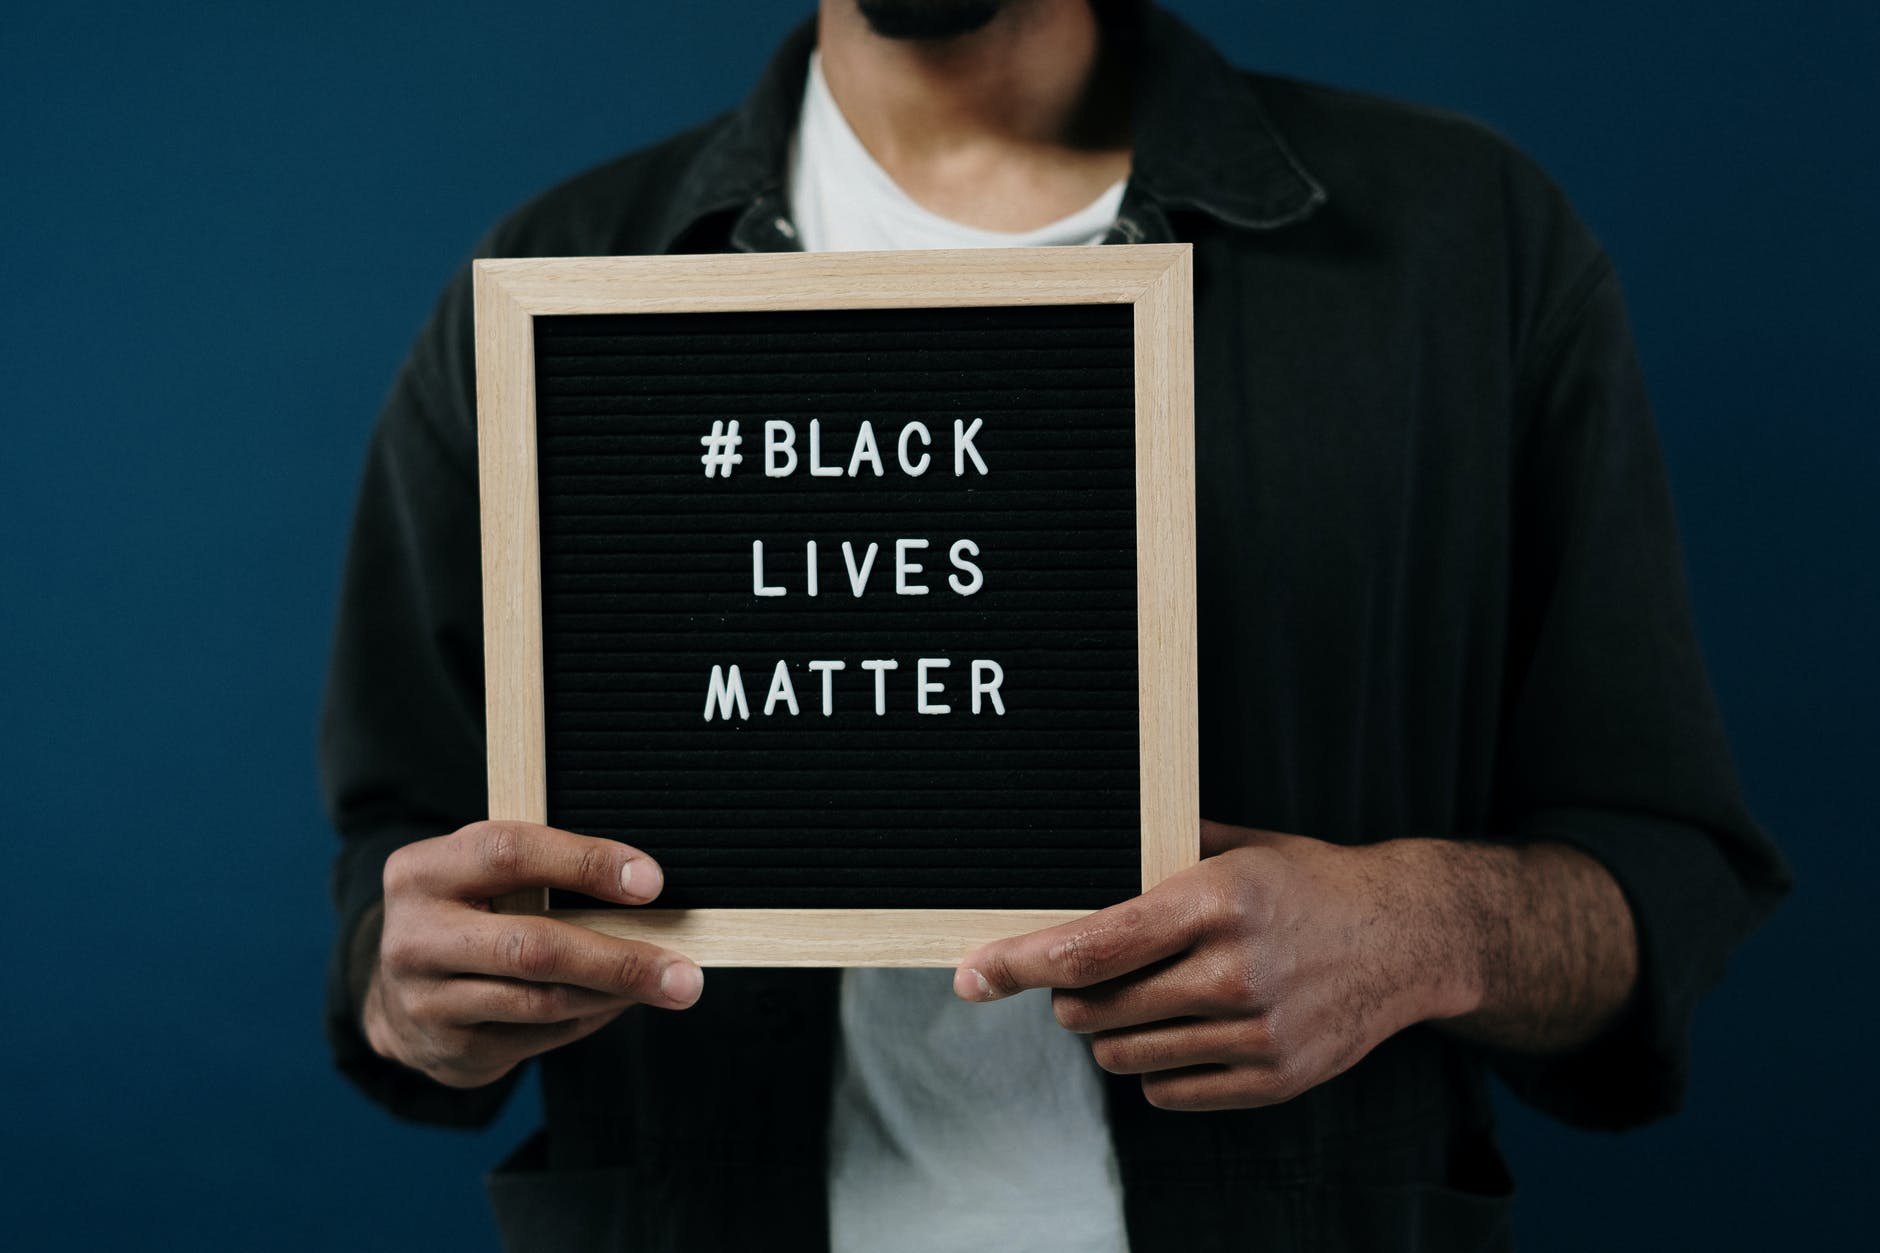 Photo of a Black man's torso holding a board that says # Black Lives Matter in his hands